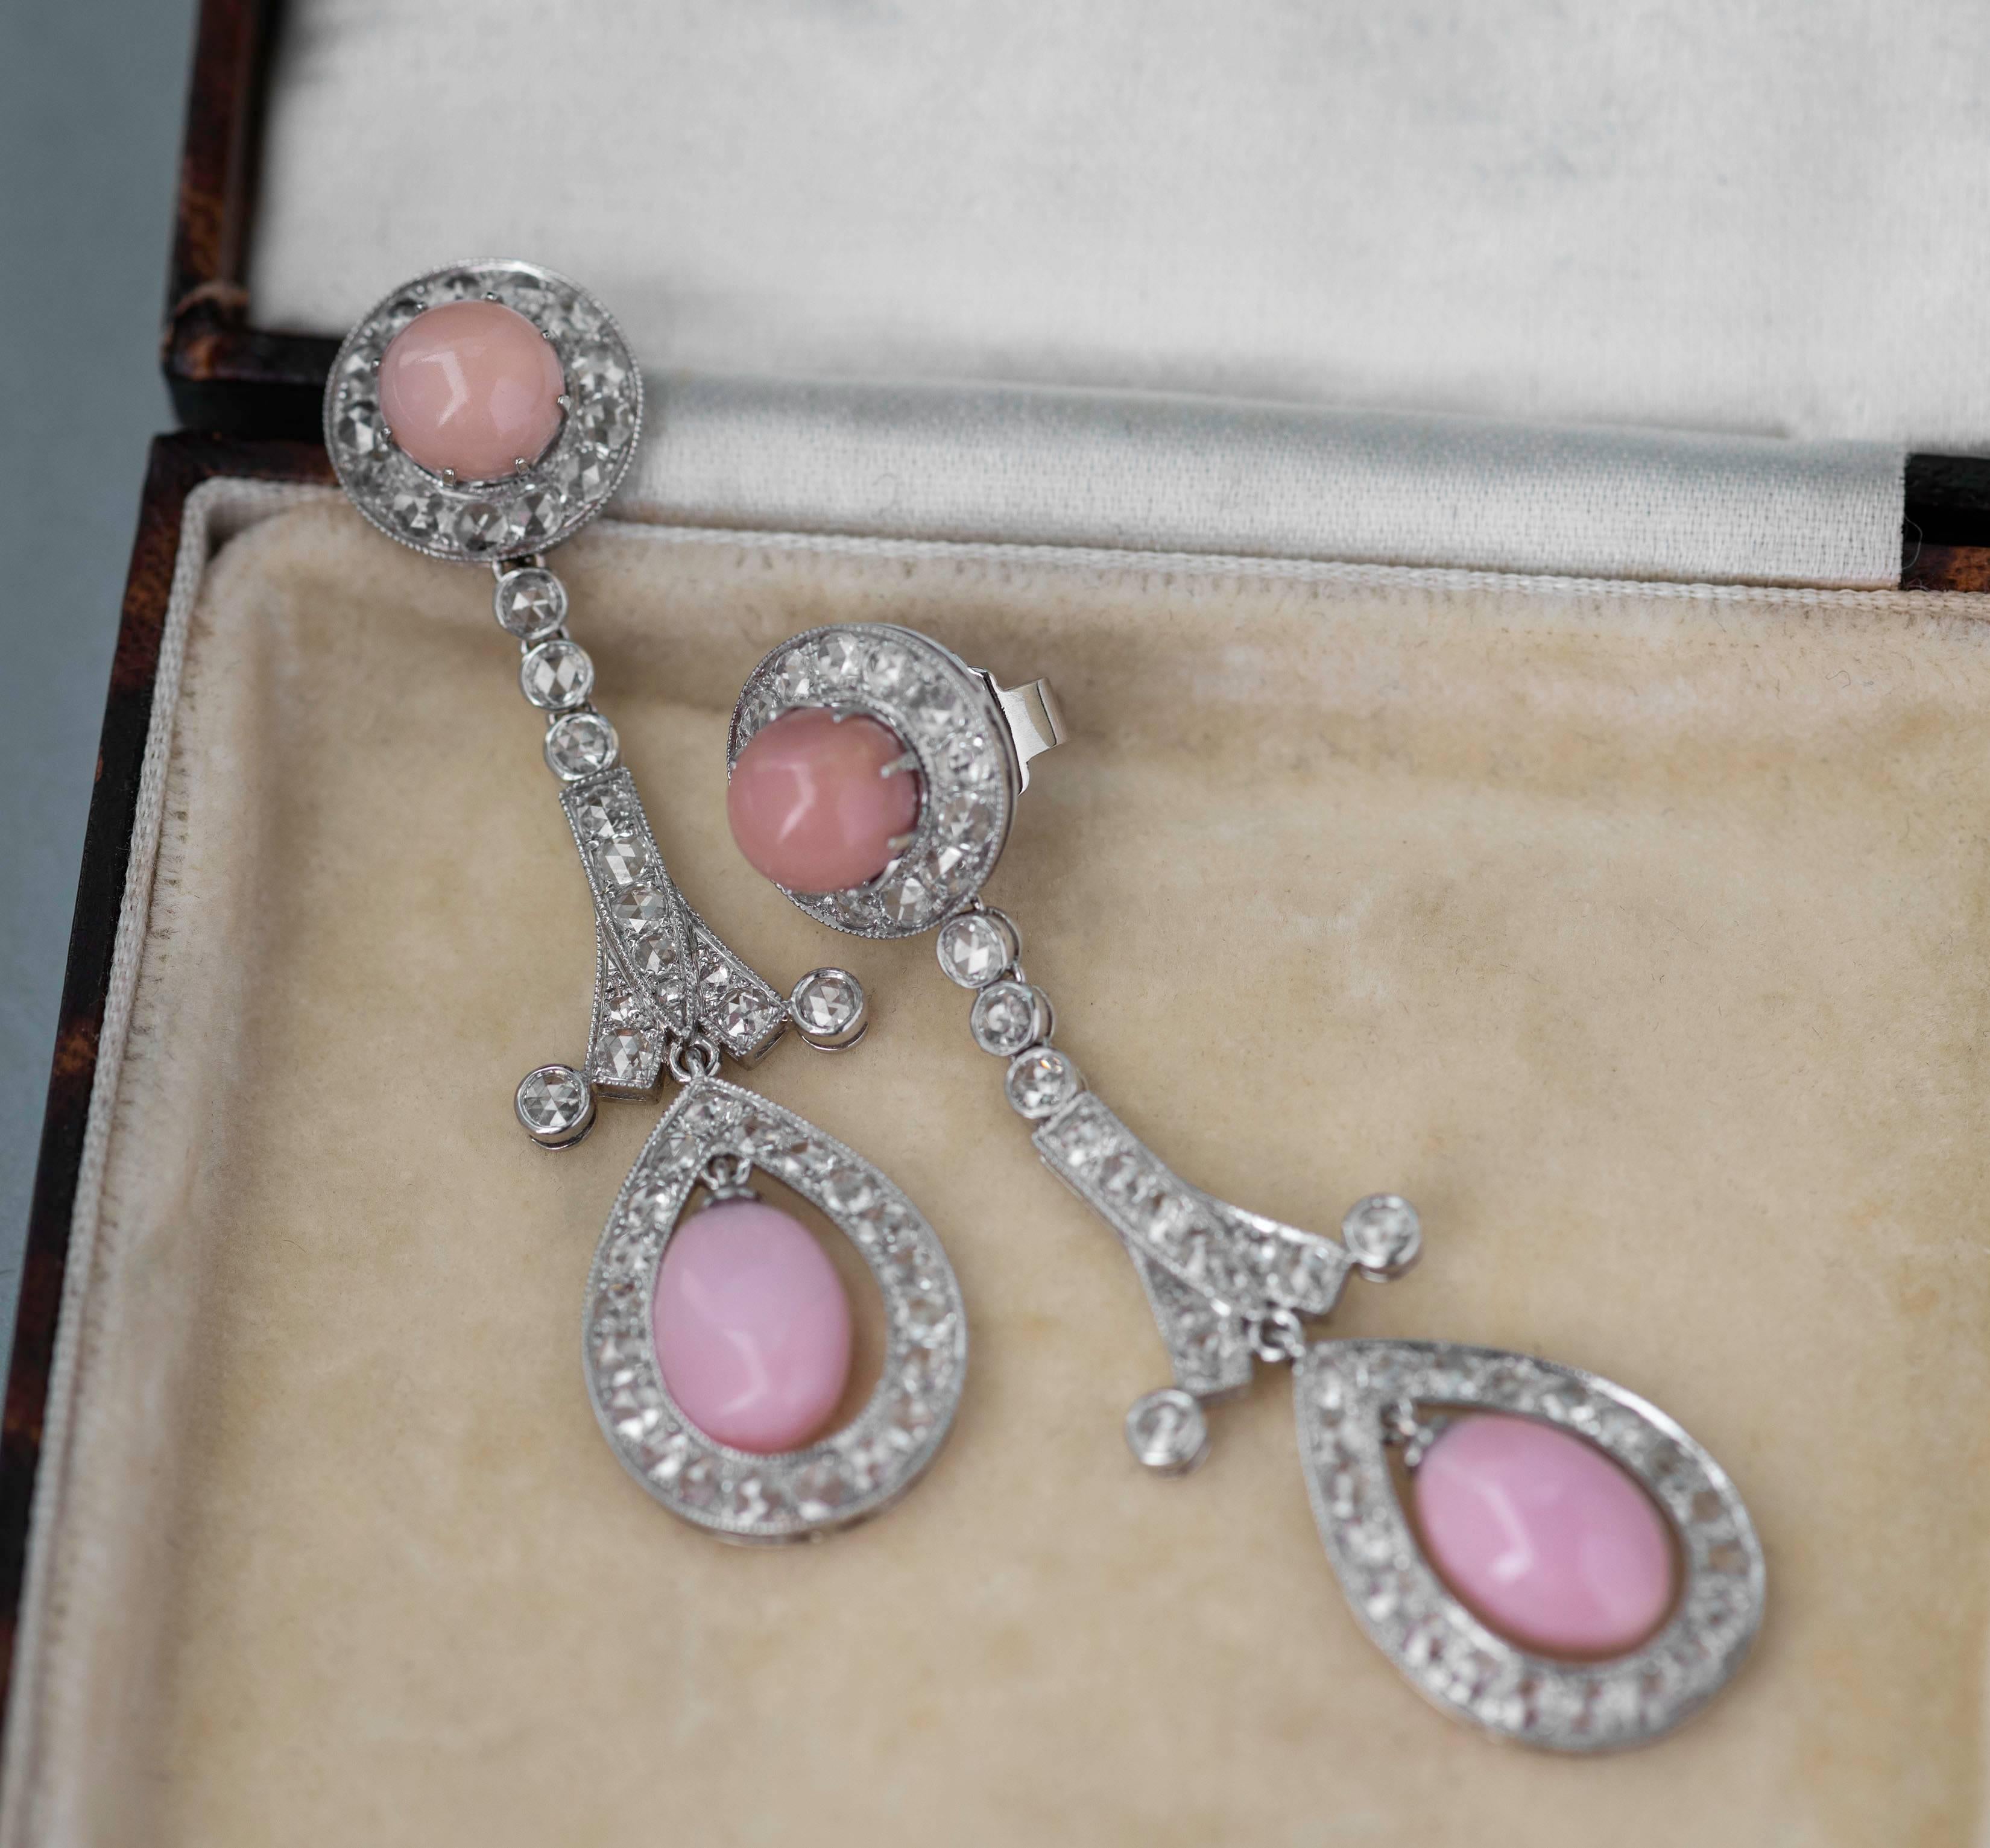 These stunning pink conch pearl and diamond earrings are such an elegant and feminine addition to any jewellery collection. Each earring has two conch pearls, one free hanging oval-shaped and one round set in a diamond cluster at the top. Between